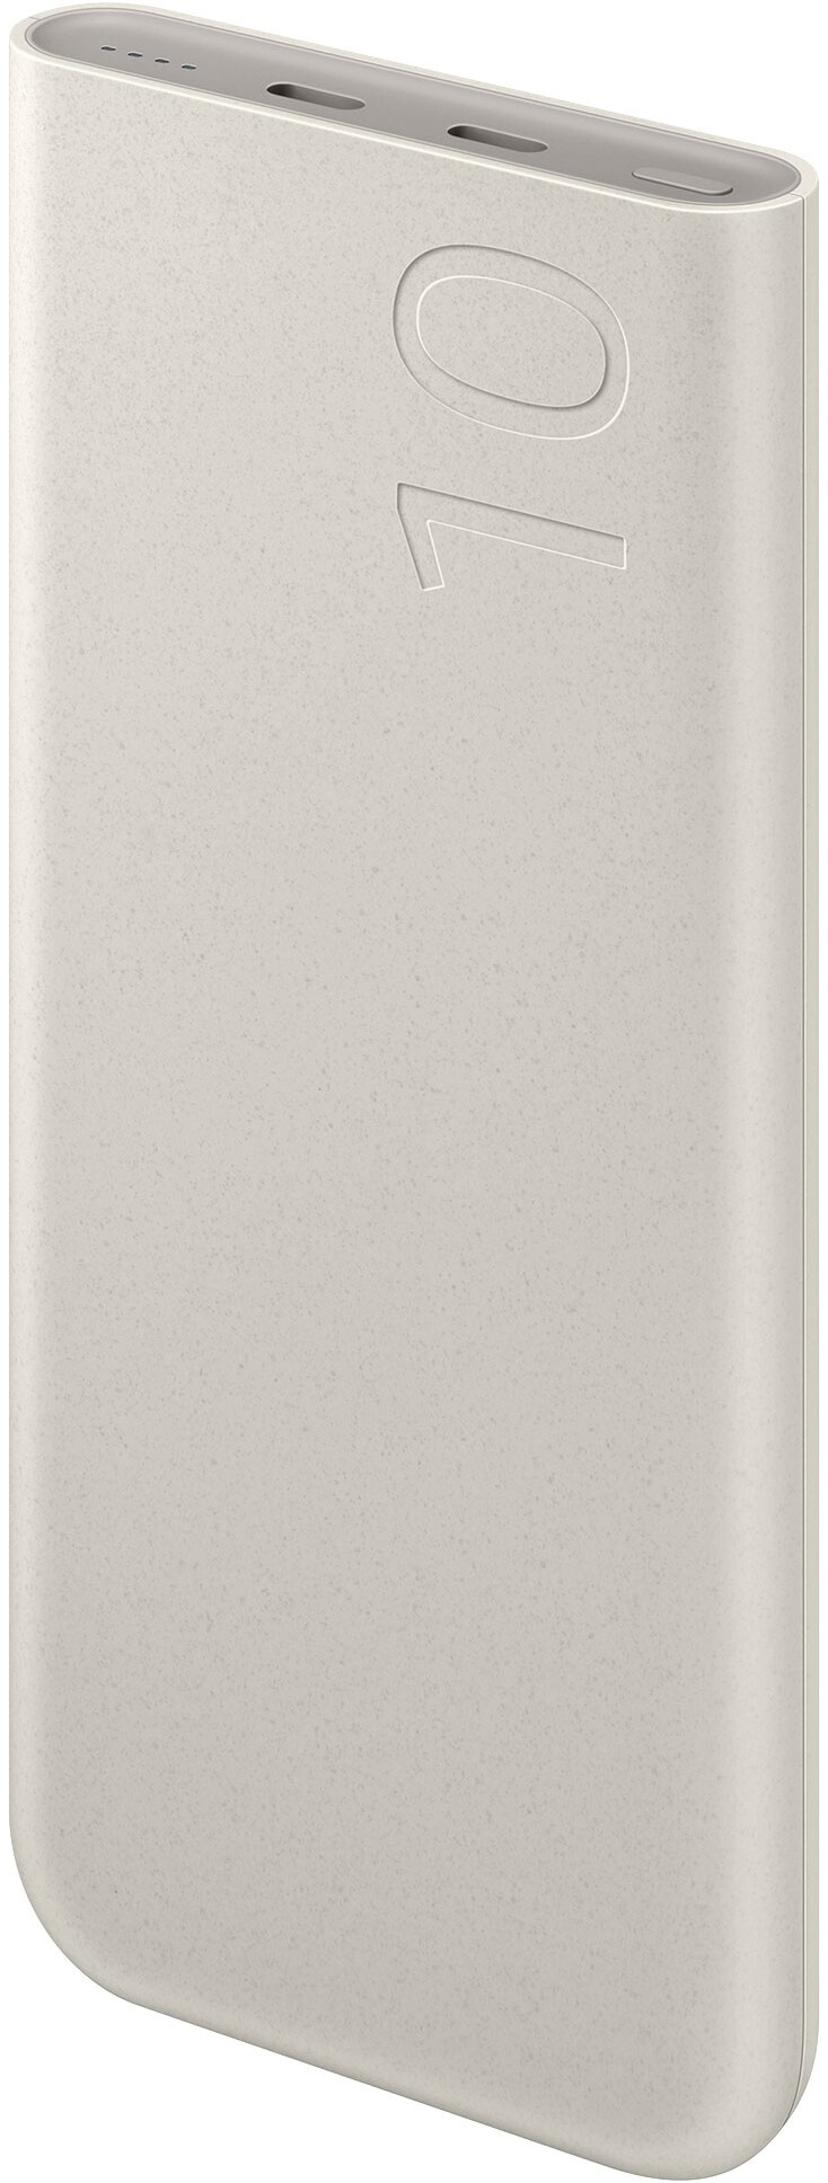 Samsung Portable Battery Pack